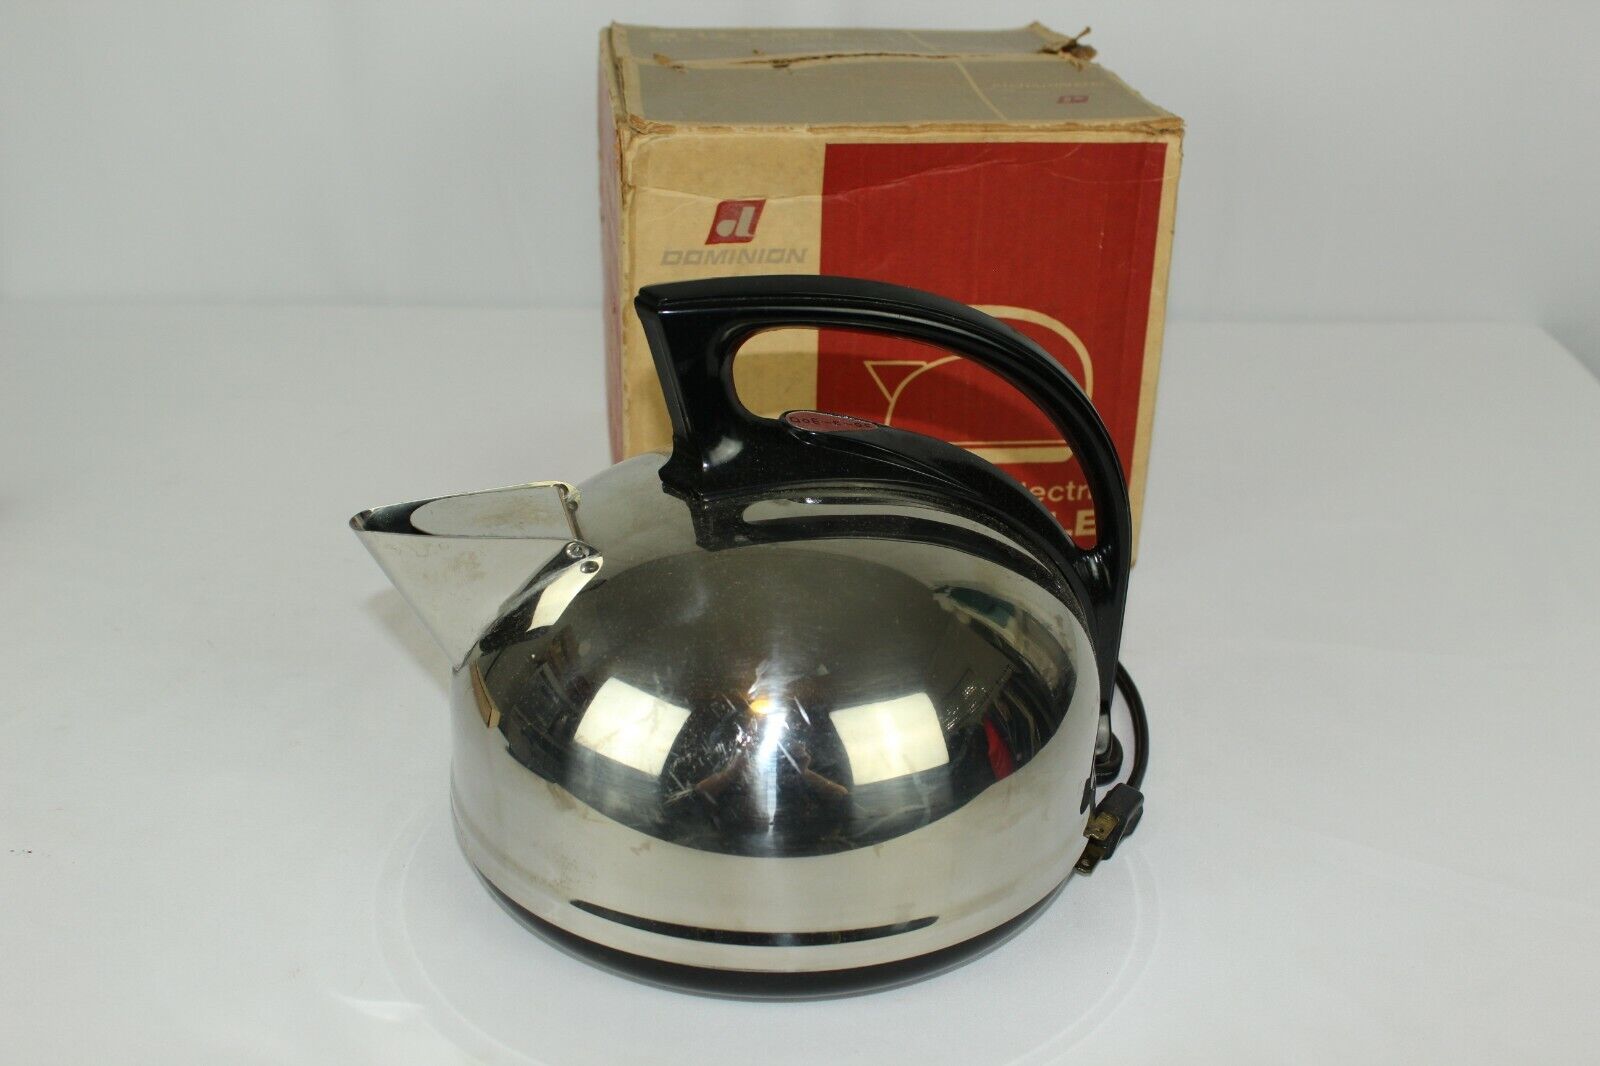 Rare Vintage Dominion Automatic Electric Chrome Kettle And Box